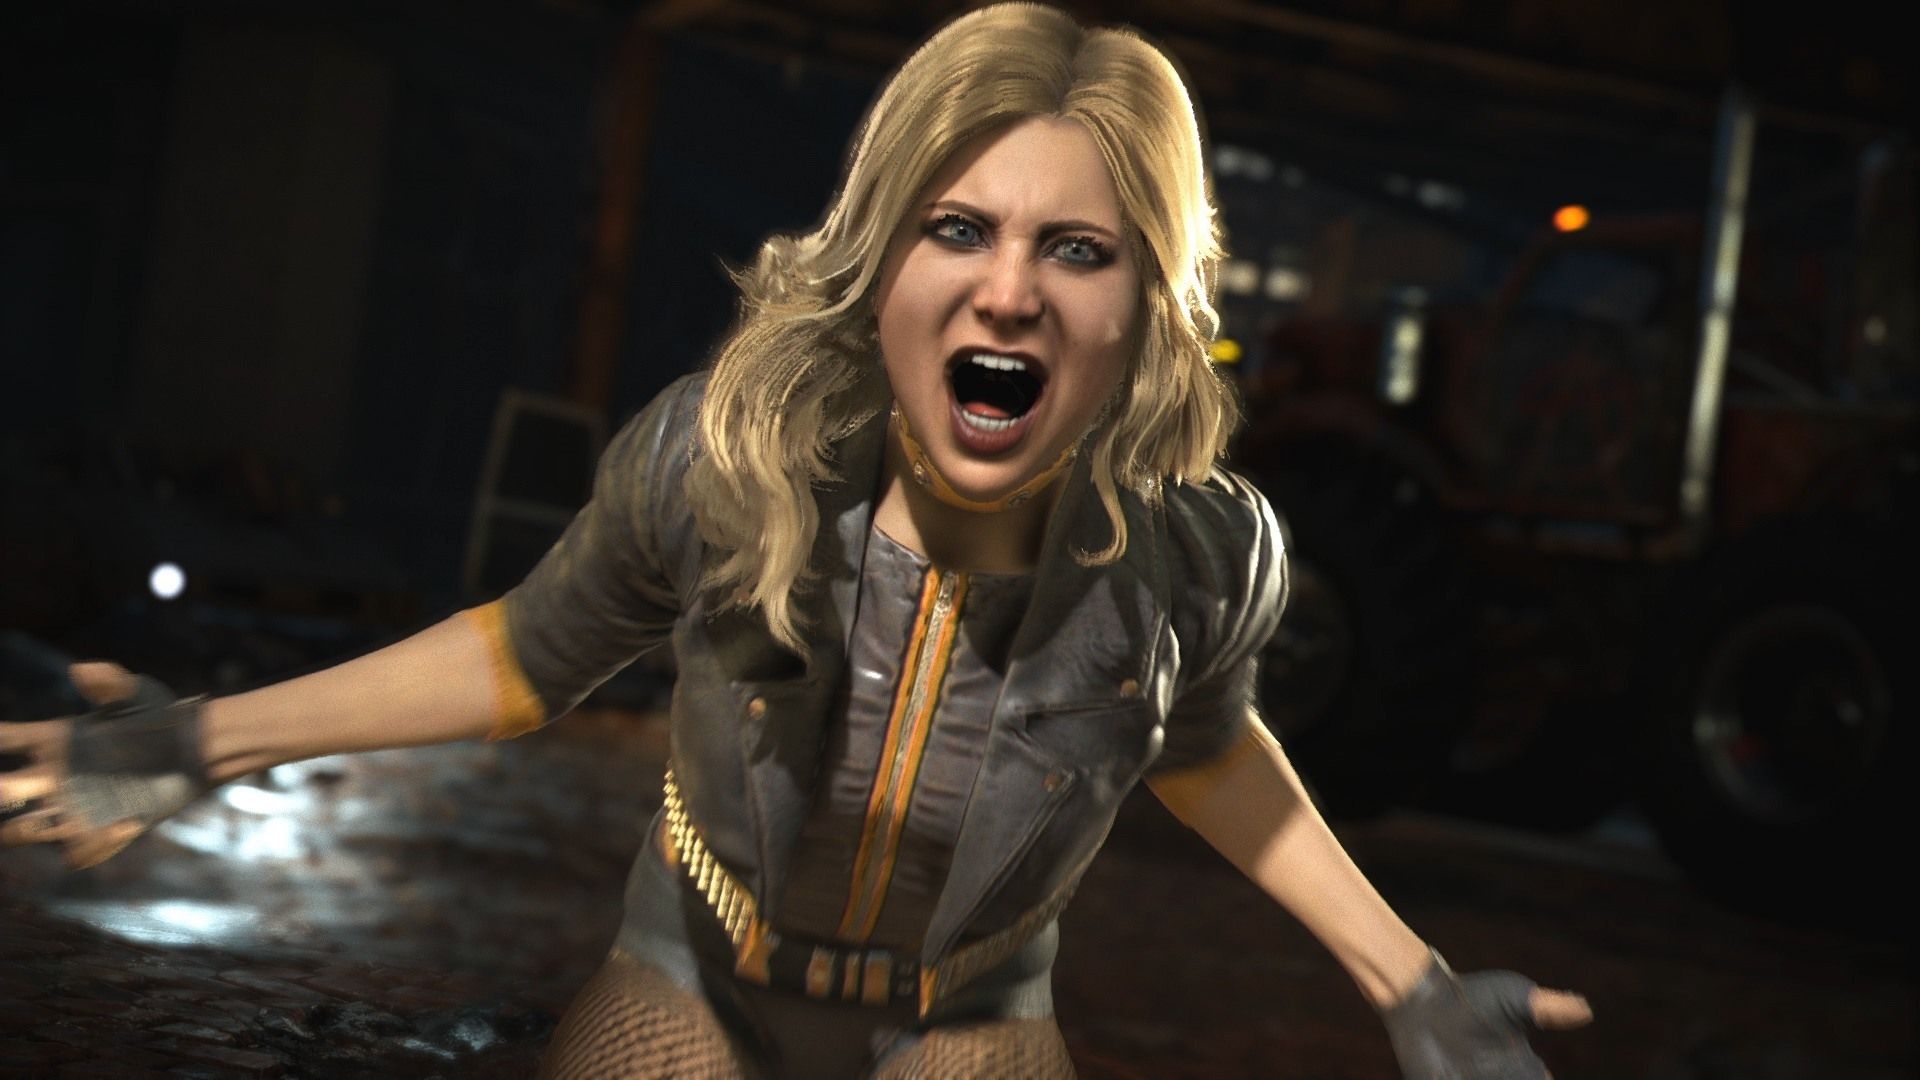 Image Result For Injustice 2 Black Canary Wallpaper - Black Canary Injustice 2 , HD Wallpaper & Backgrounds